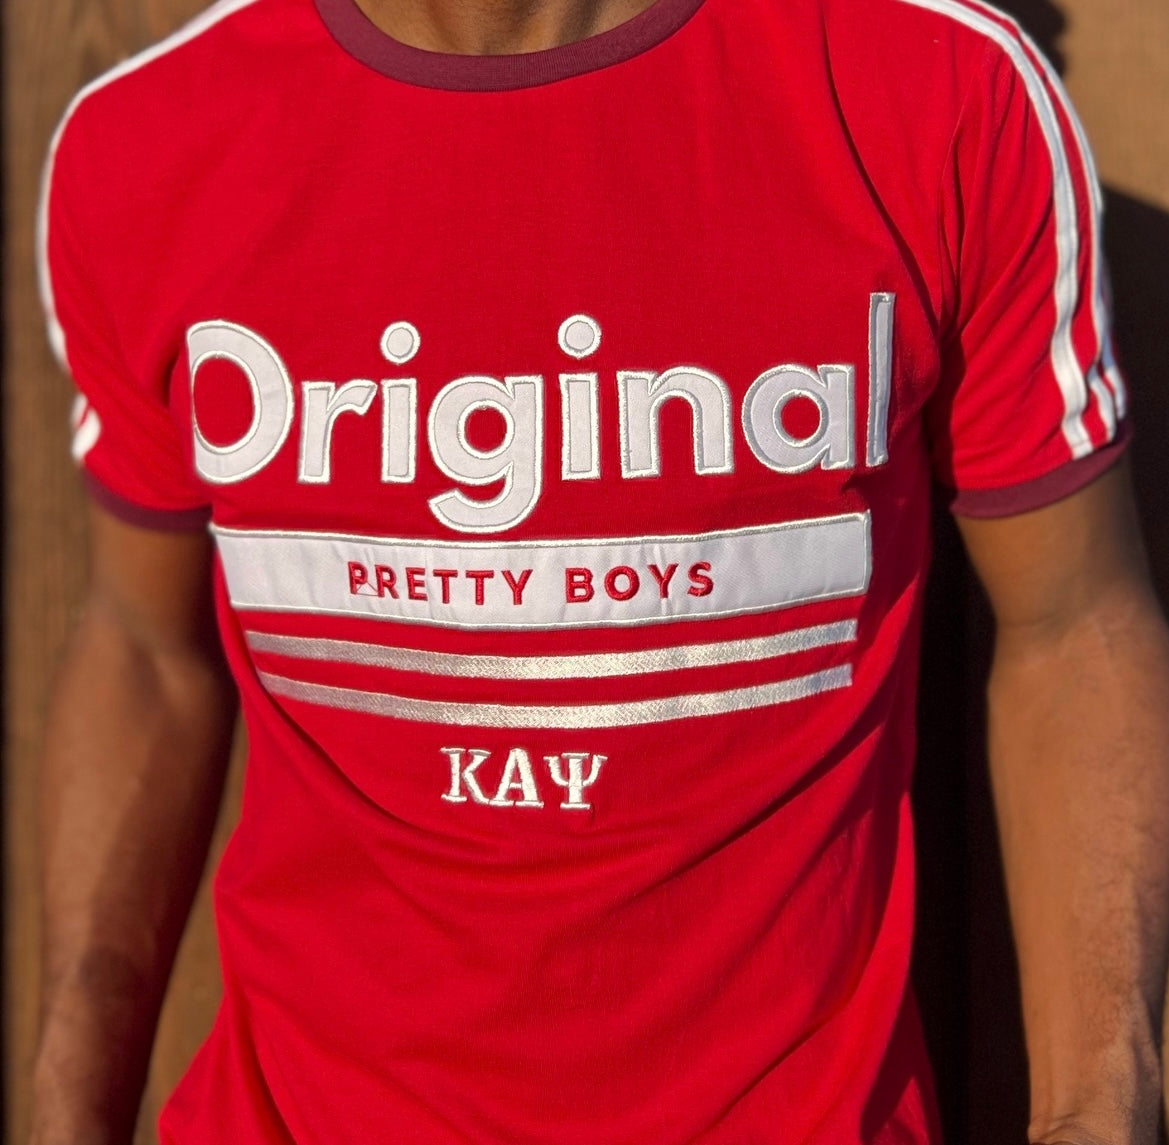 Made from high-quality materials, this shirt is designed to be durable and long-lasting. Show off your pride in the Fraternity community with this unique piece of clothing. Whether you wear it to a social event or keep it as a cherished item in your collection, this Kappa Alpha Psi T-shirt is sure to impress.